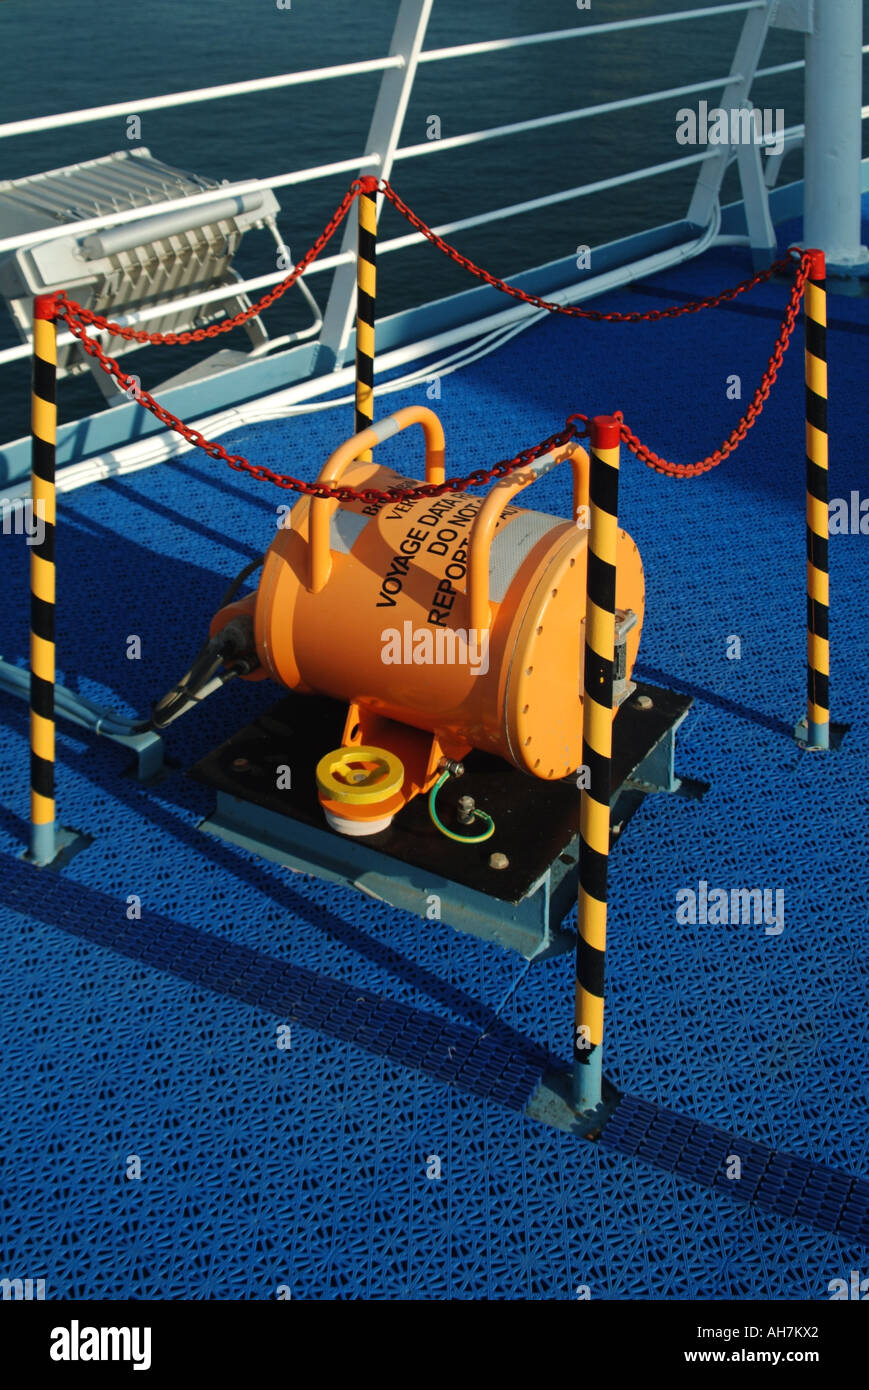 Voyage Data Recorder or VDR on deck of cruise ship to record accident information similar to black box flight recorder Stock Photo